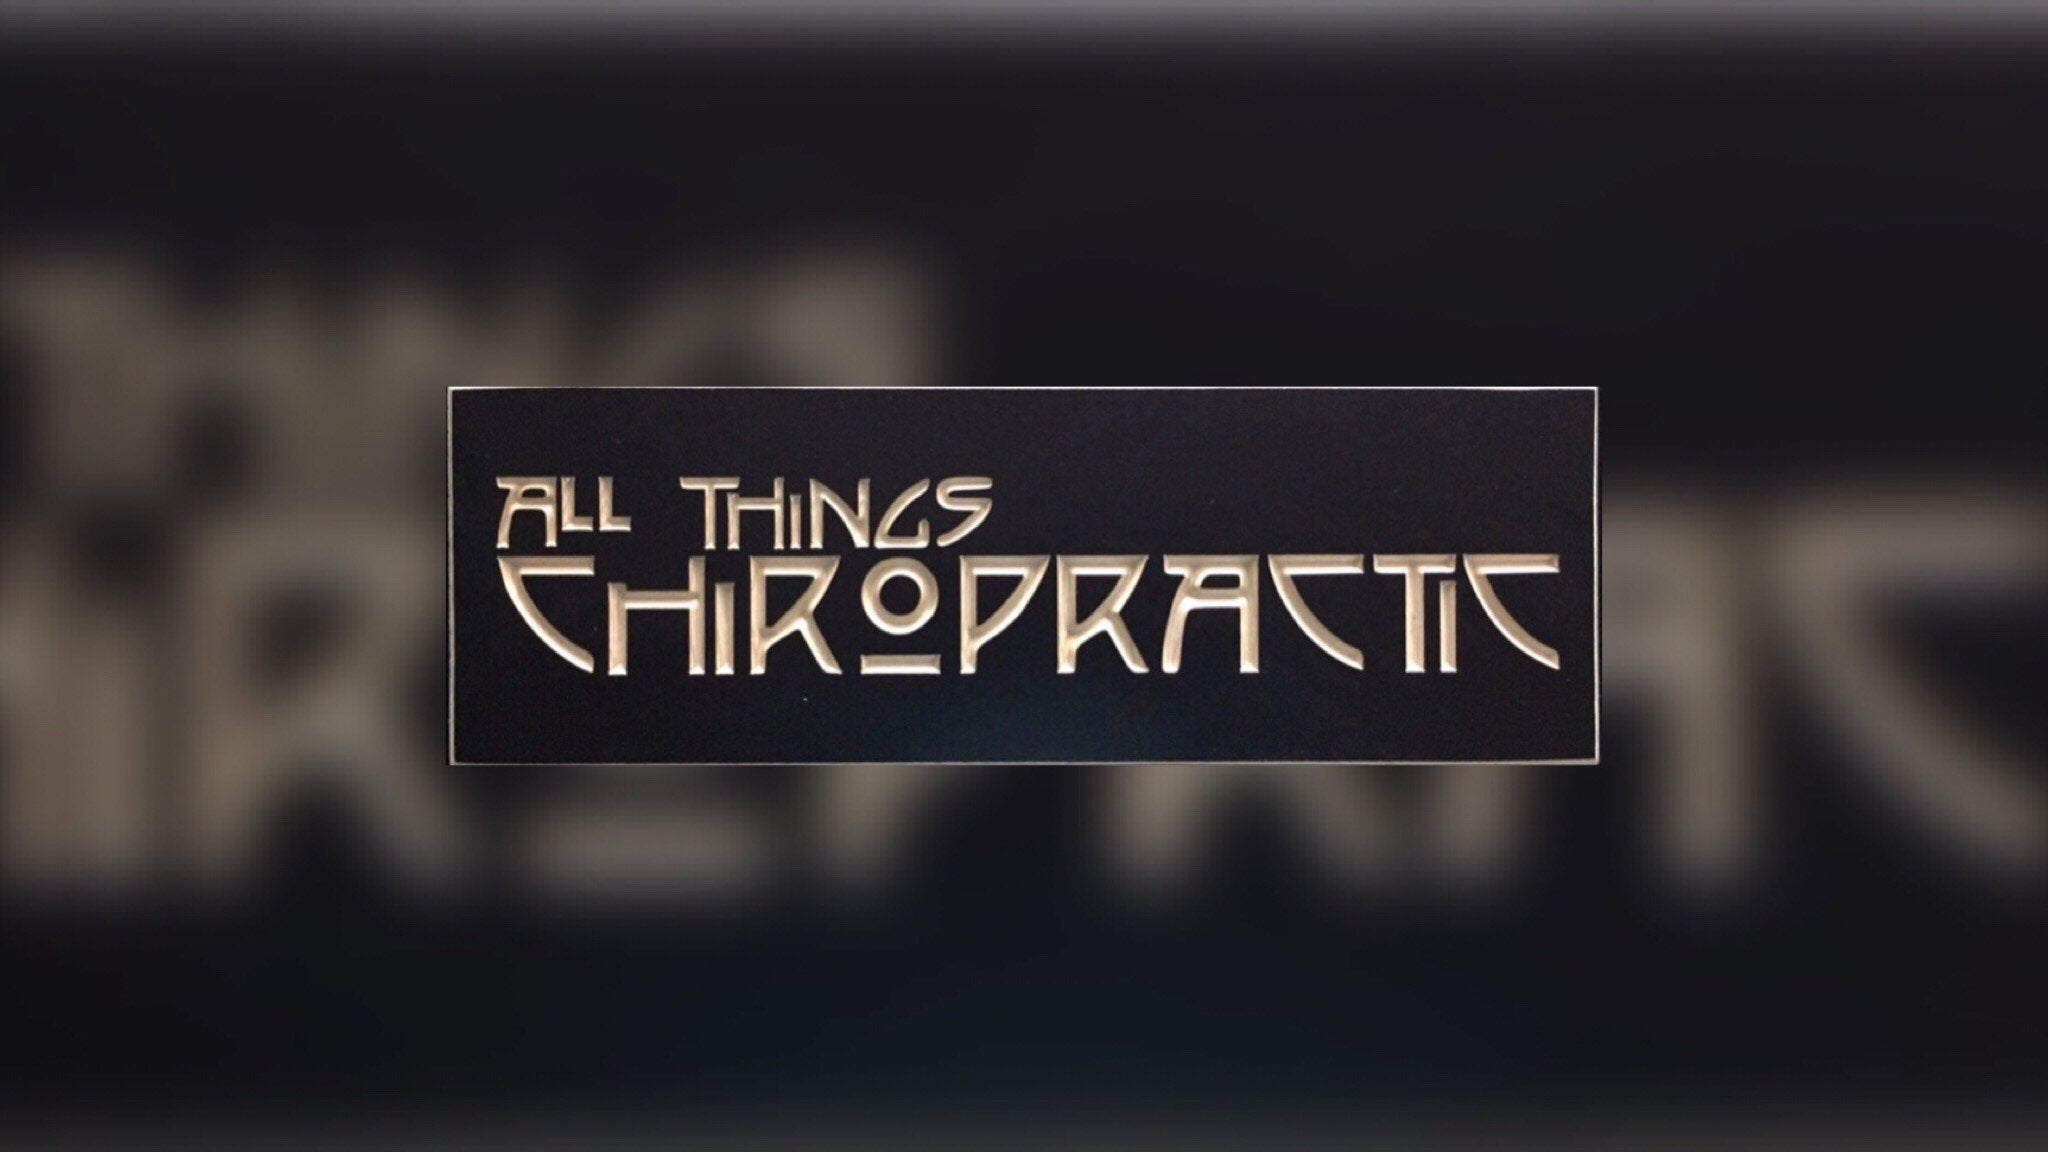 Wood Carved Chiropractor Sign All Things Chiropractic